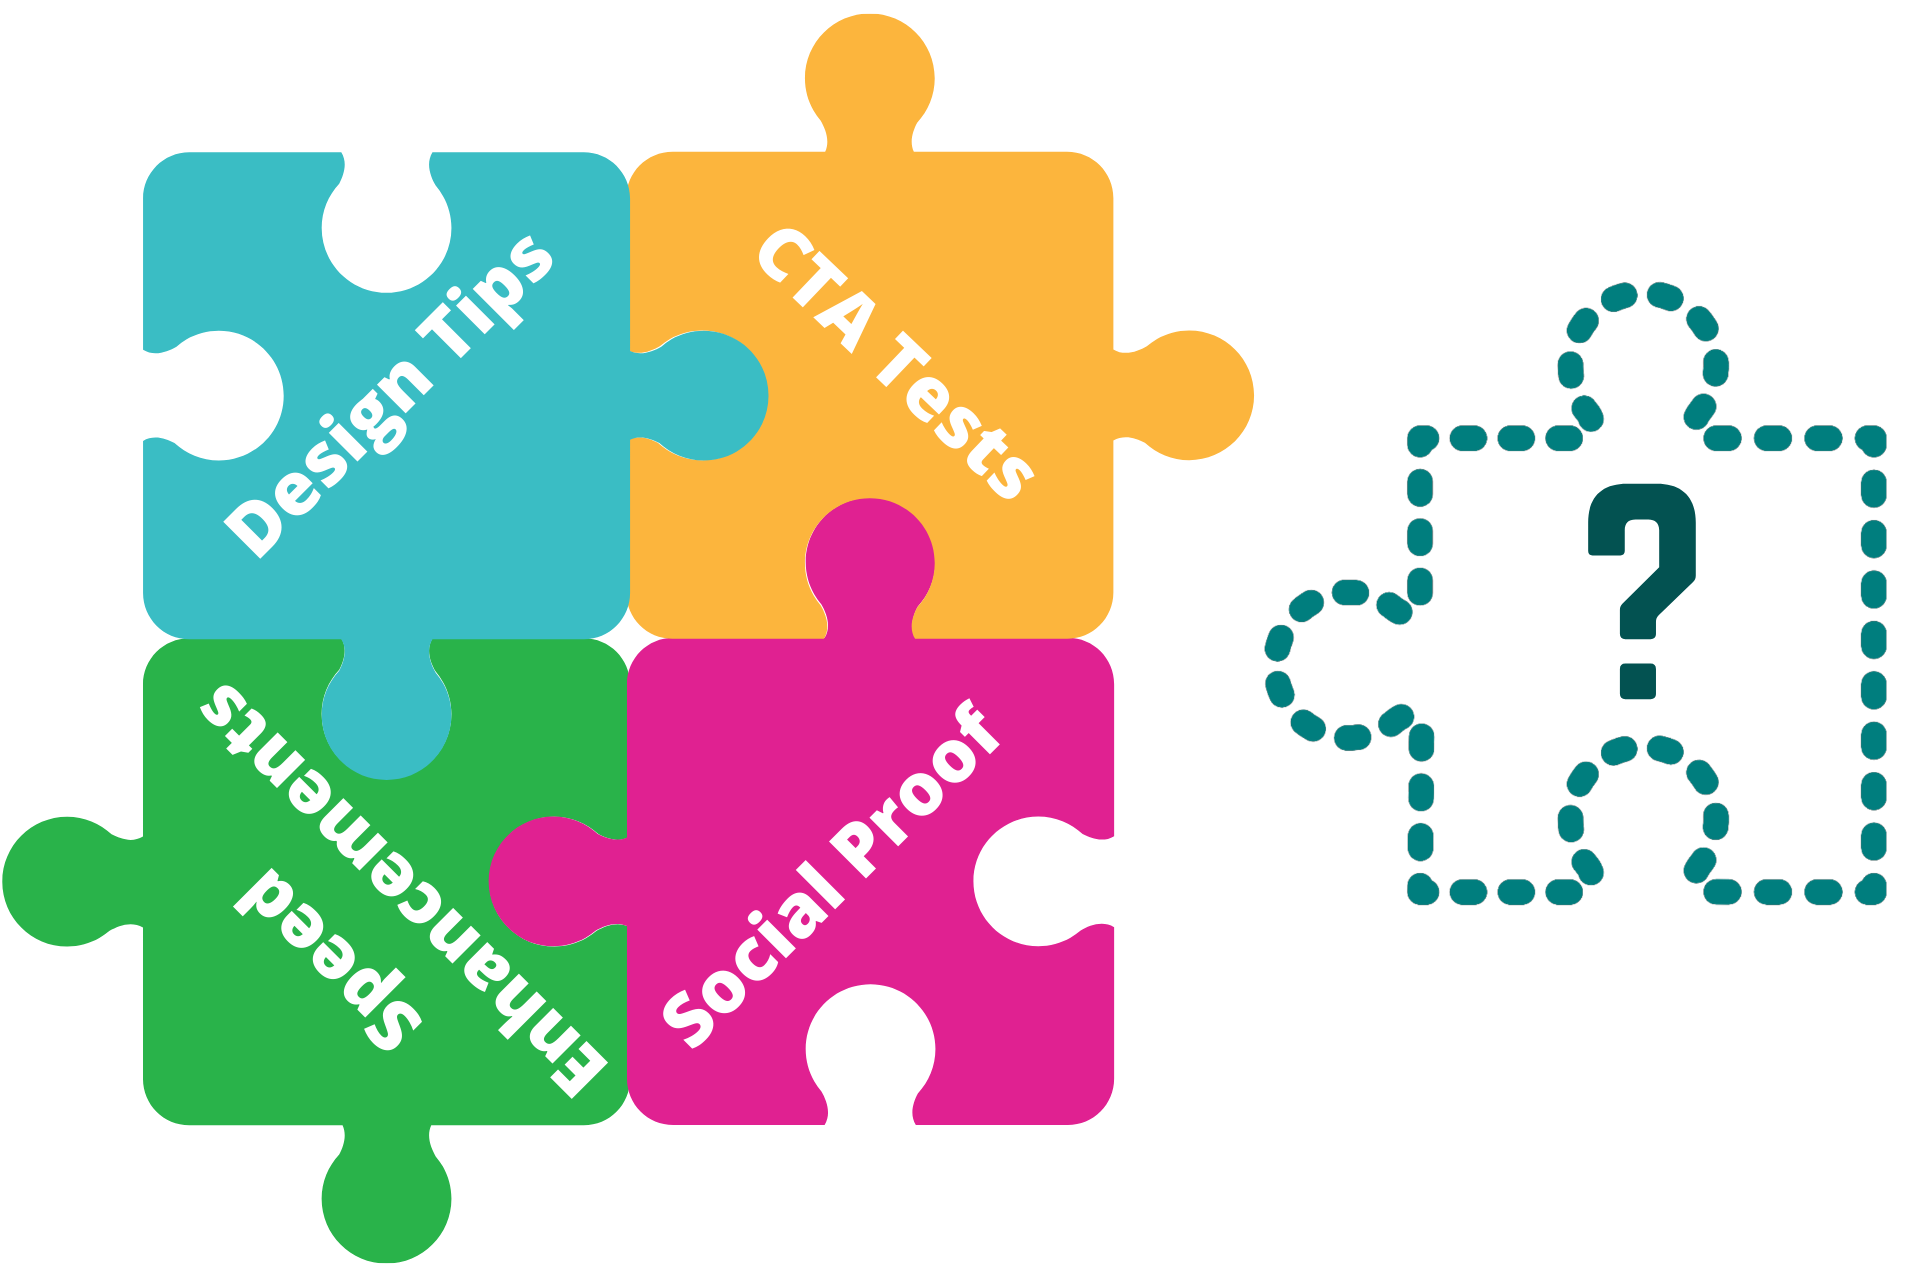 Blue puzzle piece labelled "Design tips";  Yelllow puzzle piece labelled "CTA Tests"; Green puzzle piece labelled "Speed enhancements"; Pink puzzle piece labelled "Social proof"; unattached puzzle piece outline labelled "?"